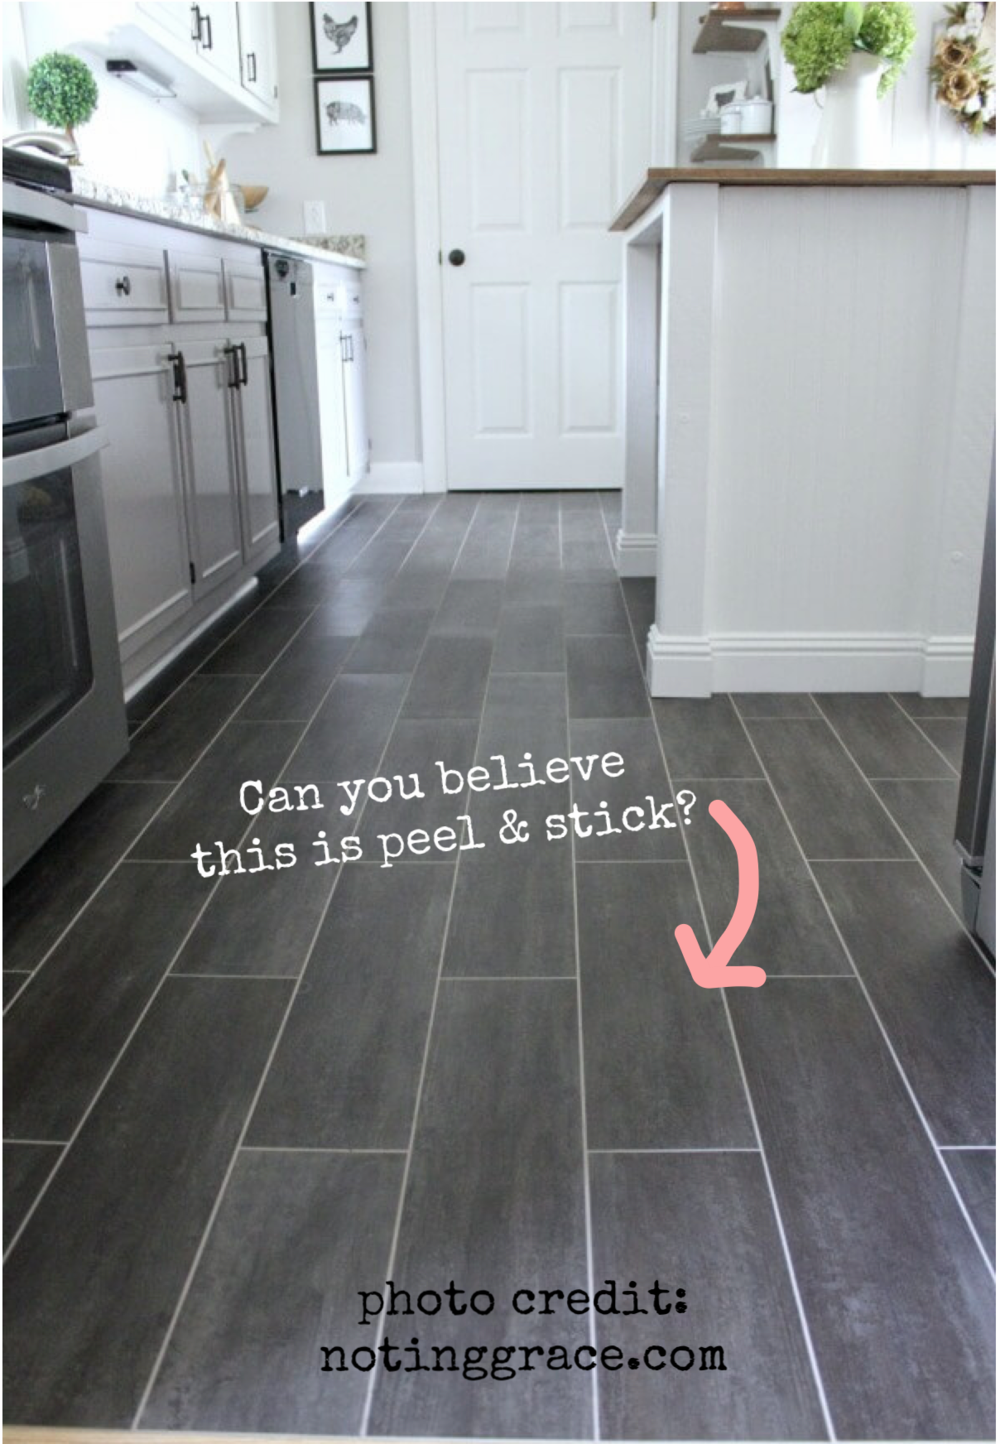 Ideas For Covering Up Tile Floors, What Flooring Can I Put Over Tiles